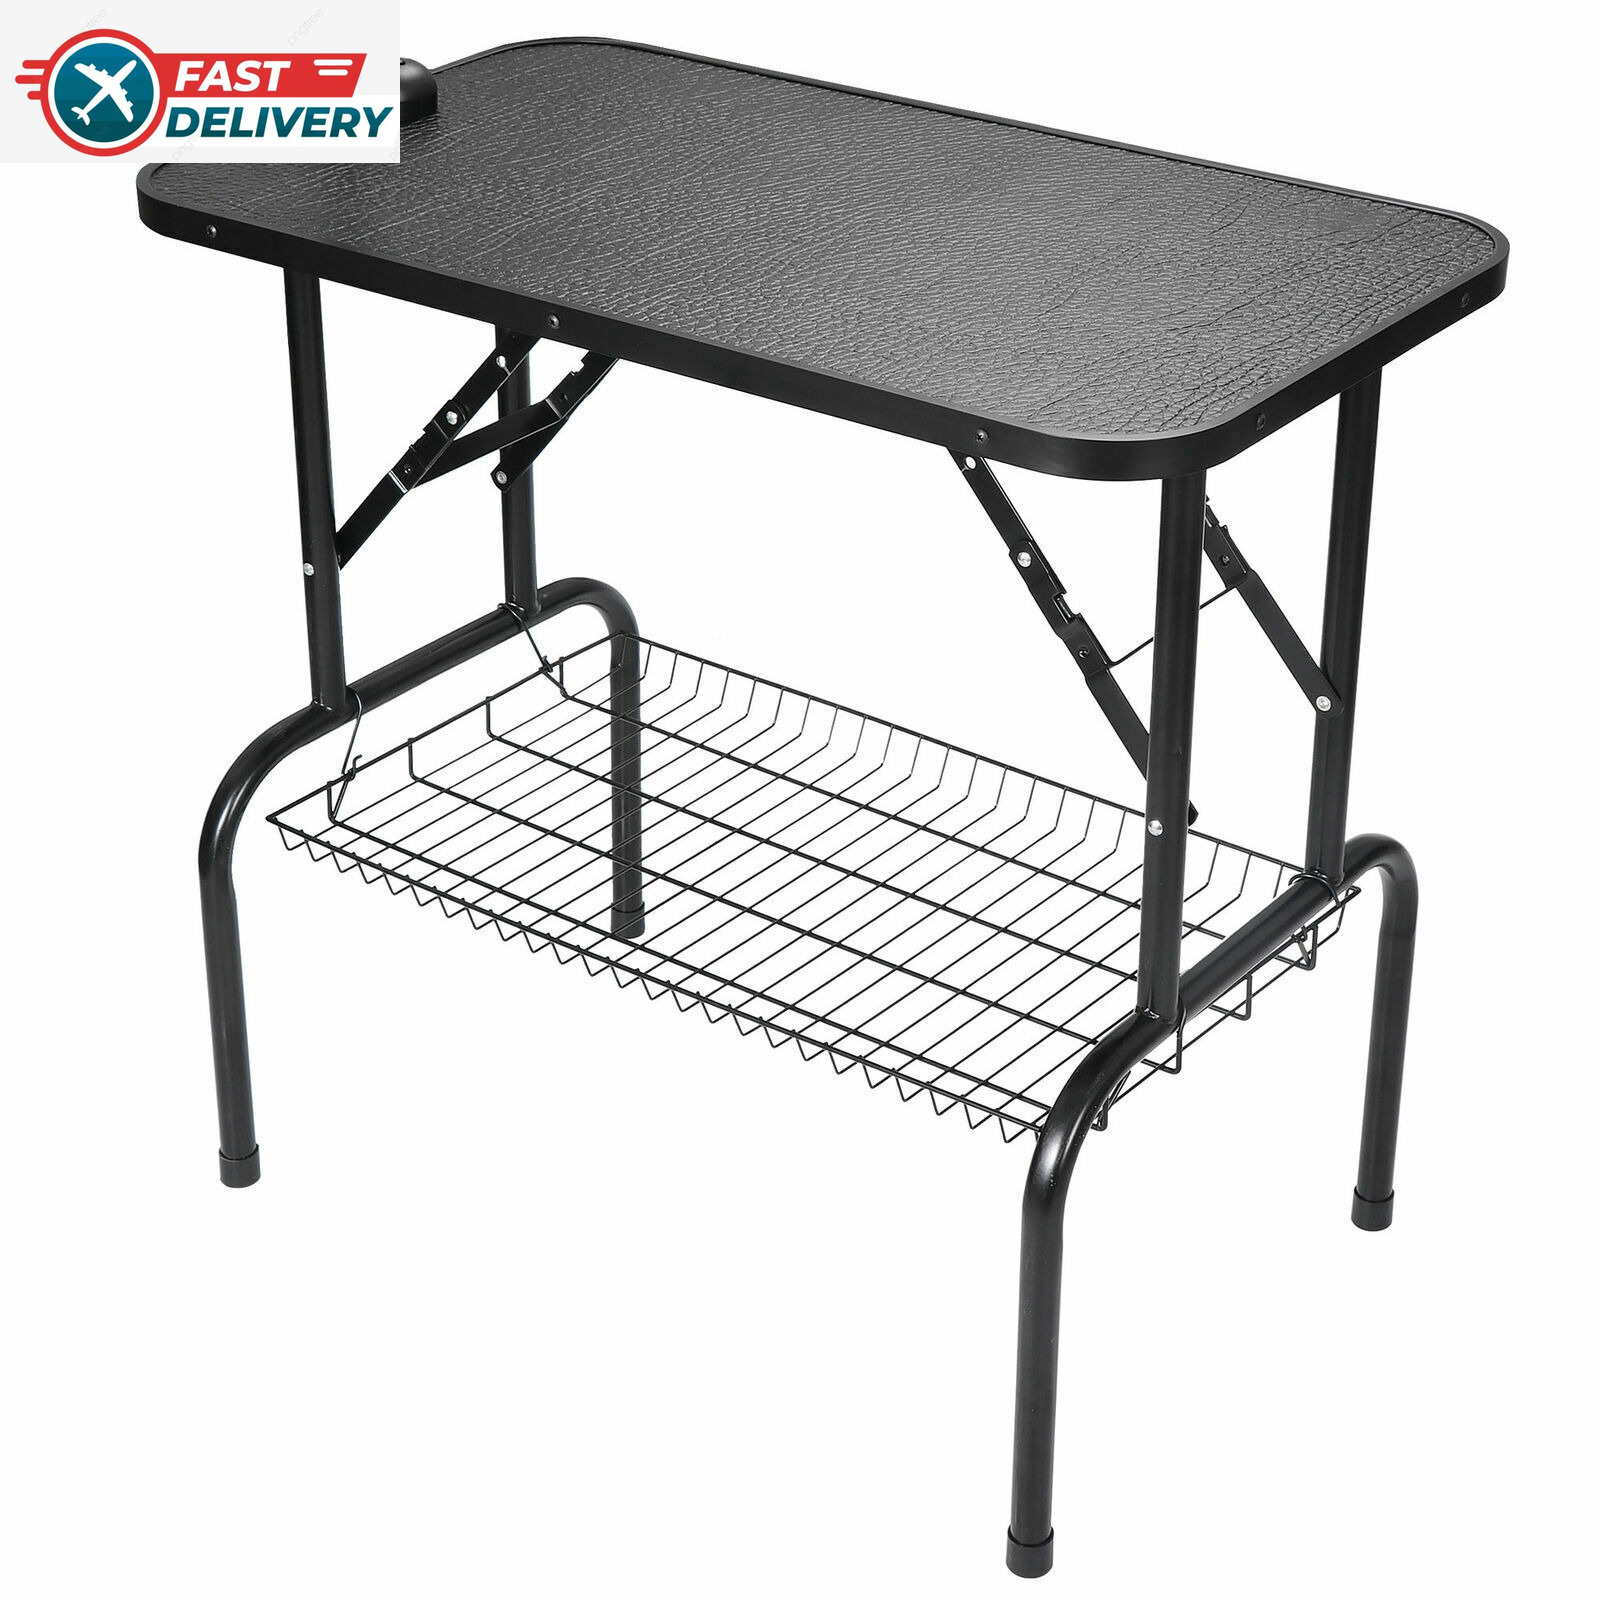 Foldable Pet Dog Cat Grooming Table W/Adjustable Arm & Noose 32